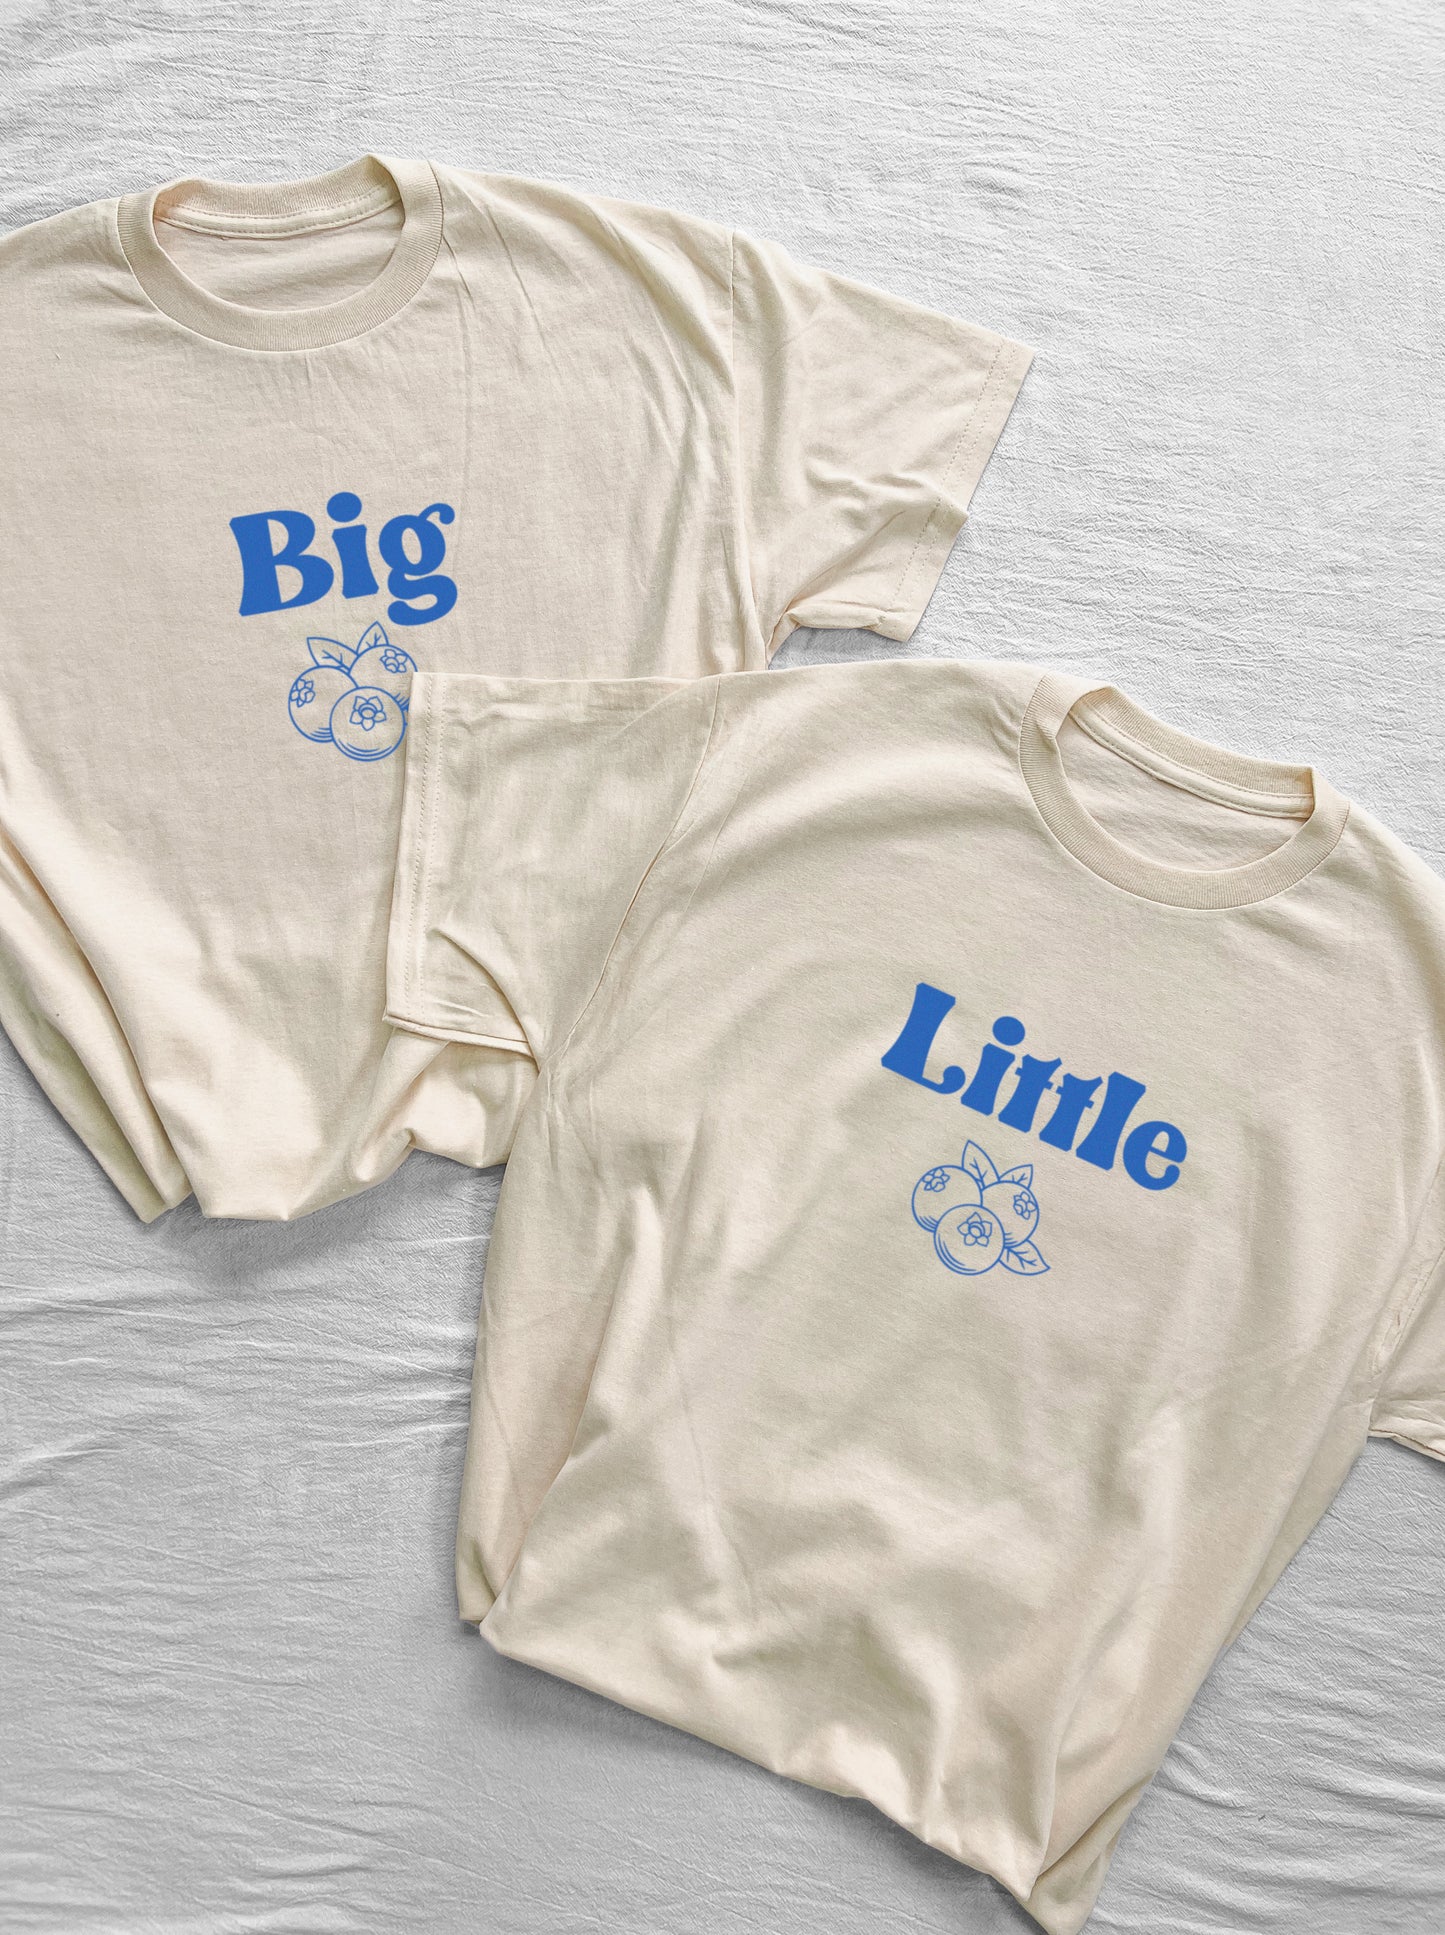 Berry Big Little Reveal Tees